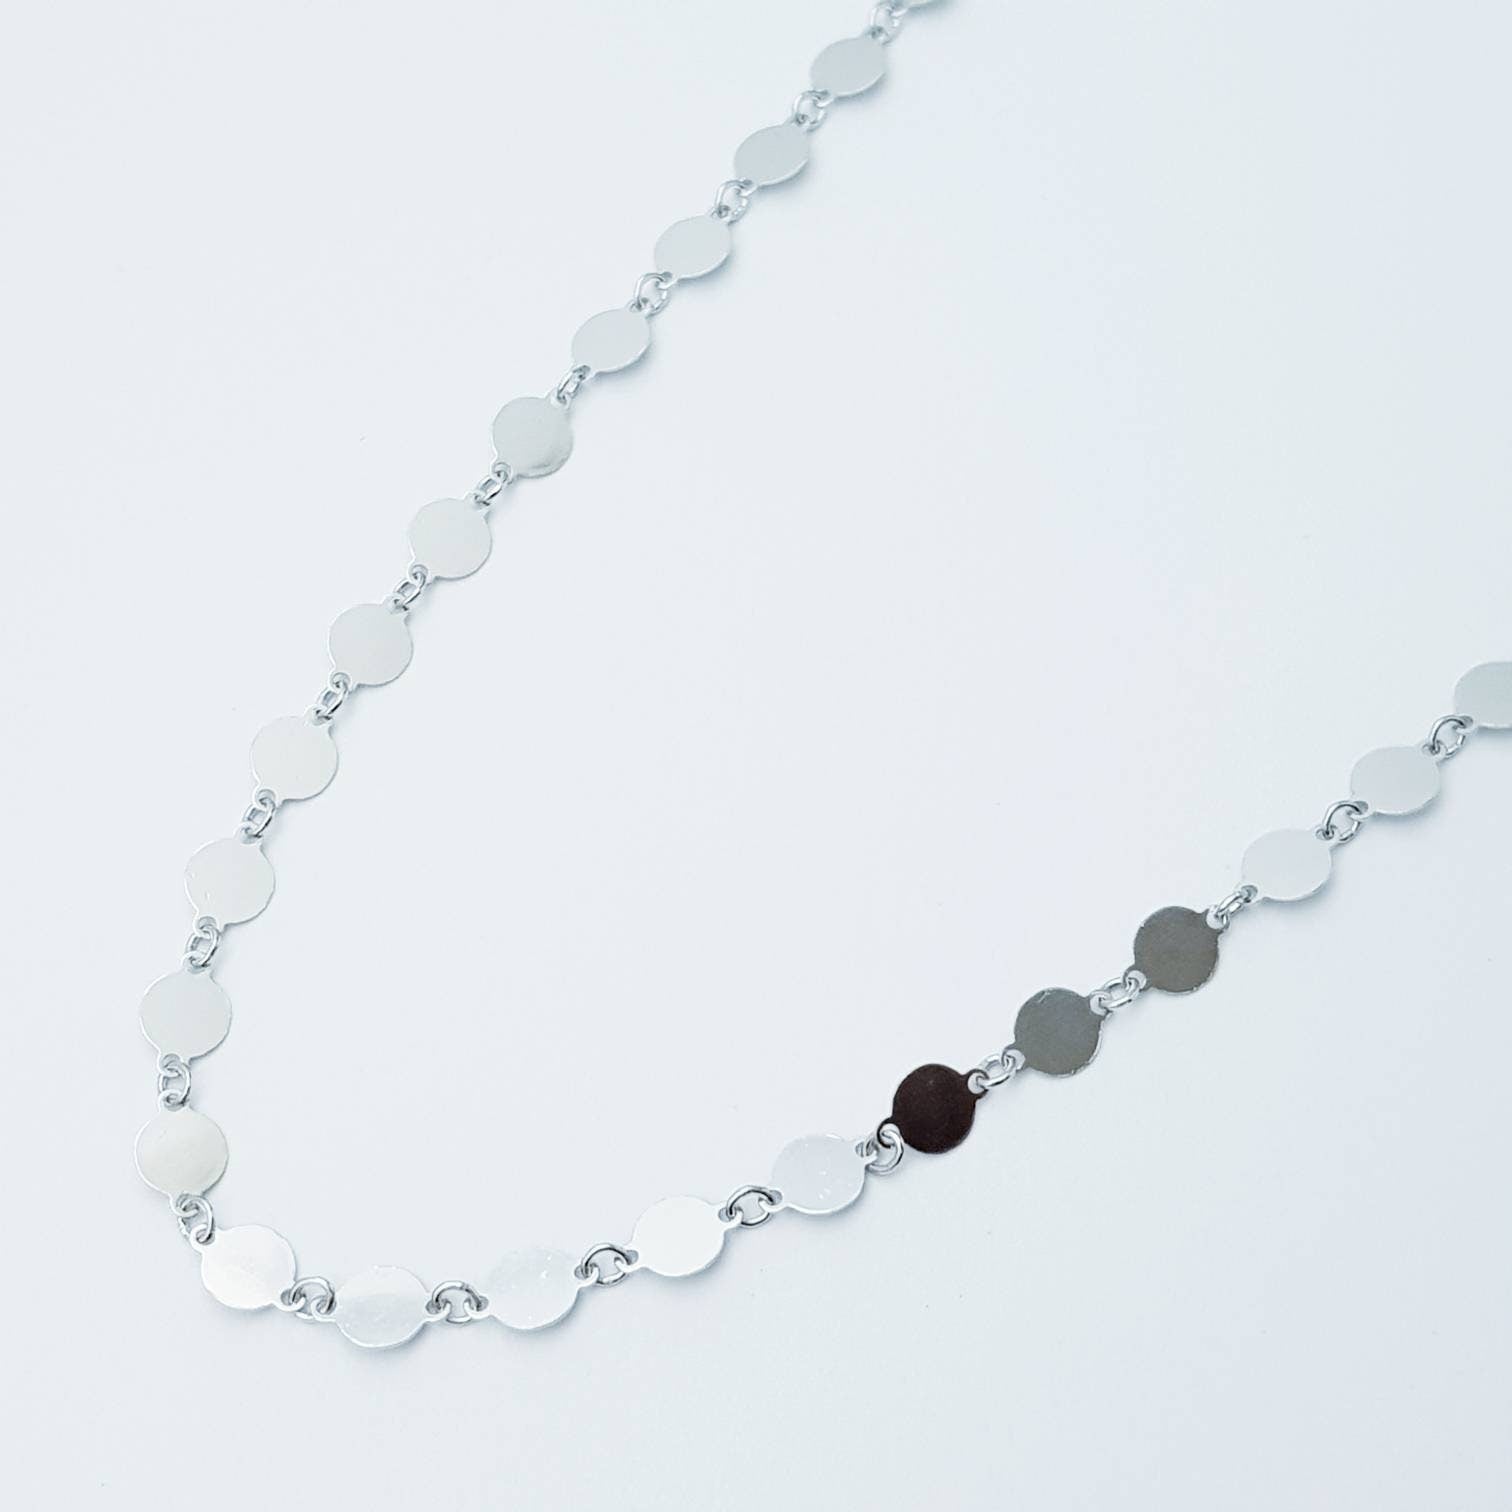 Dainty Sterling Silver necklace, shimmering layering chain necklace